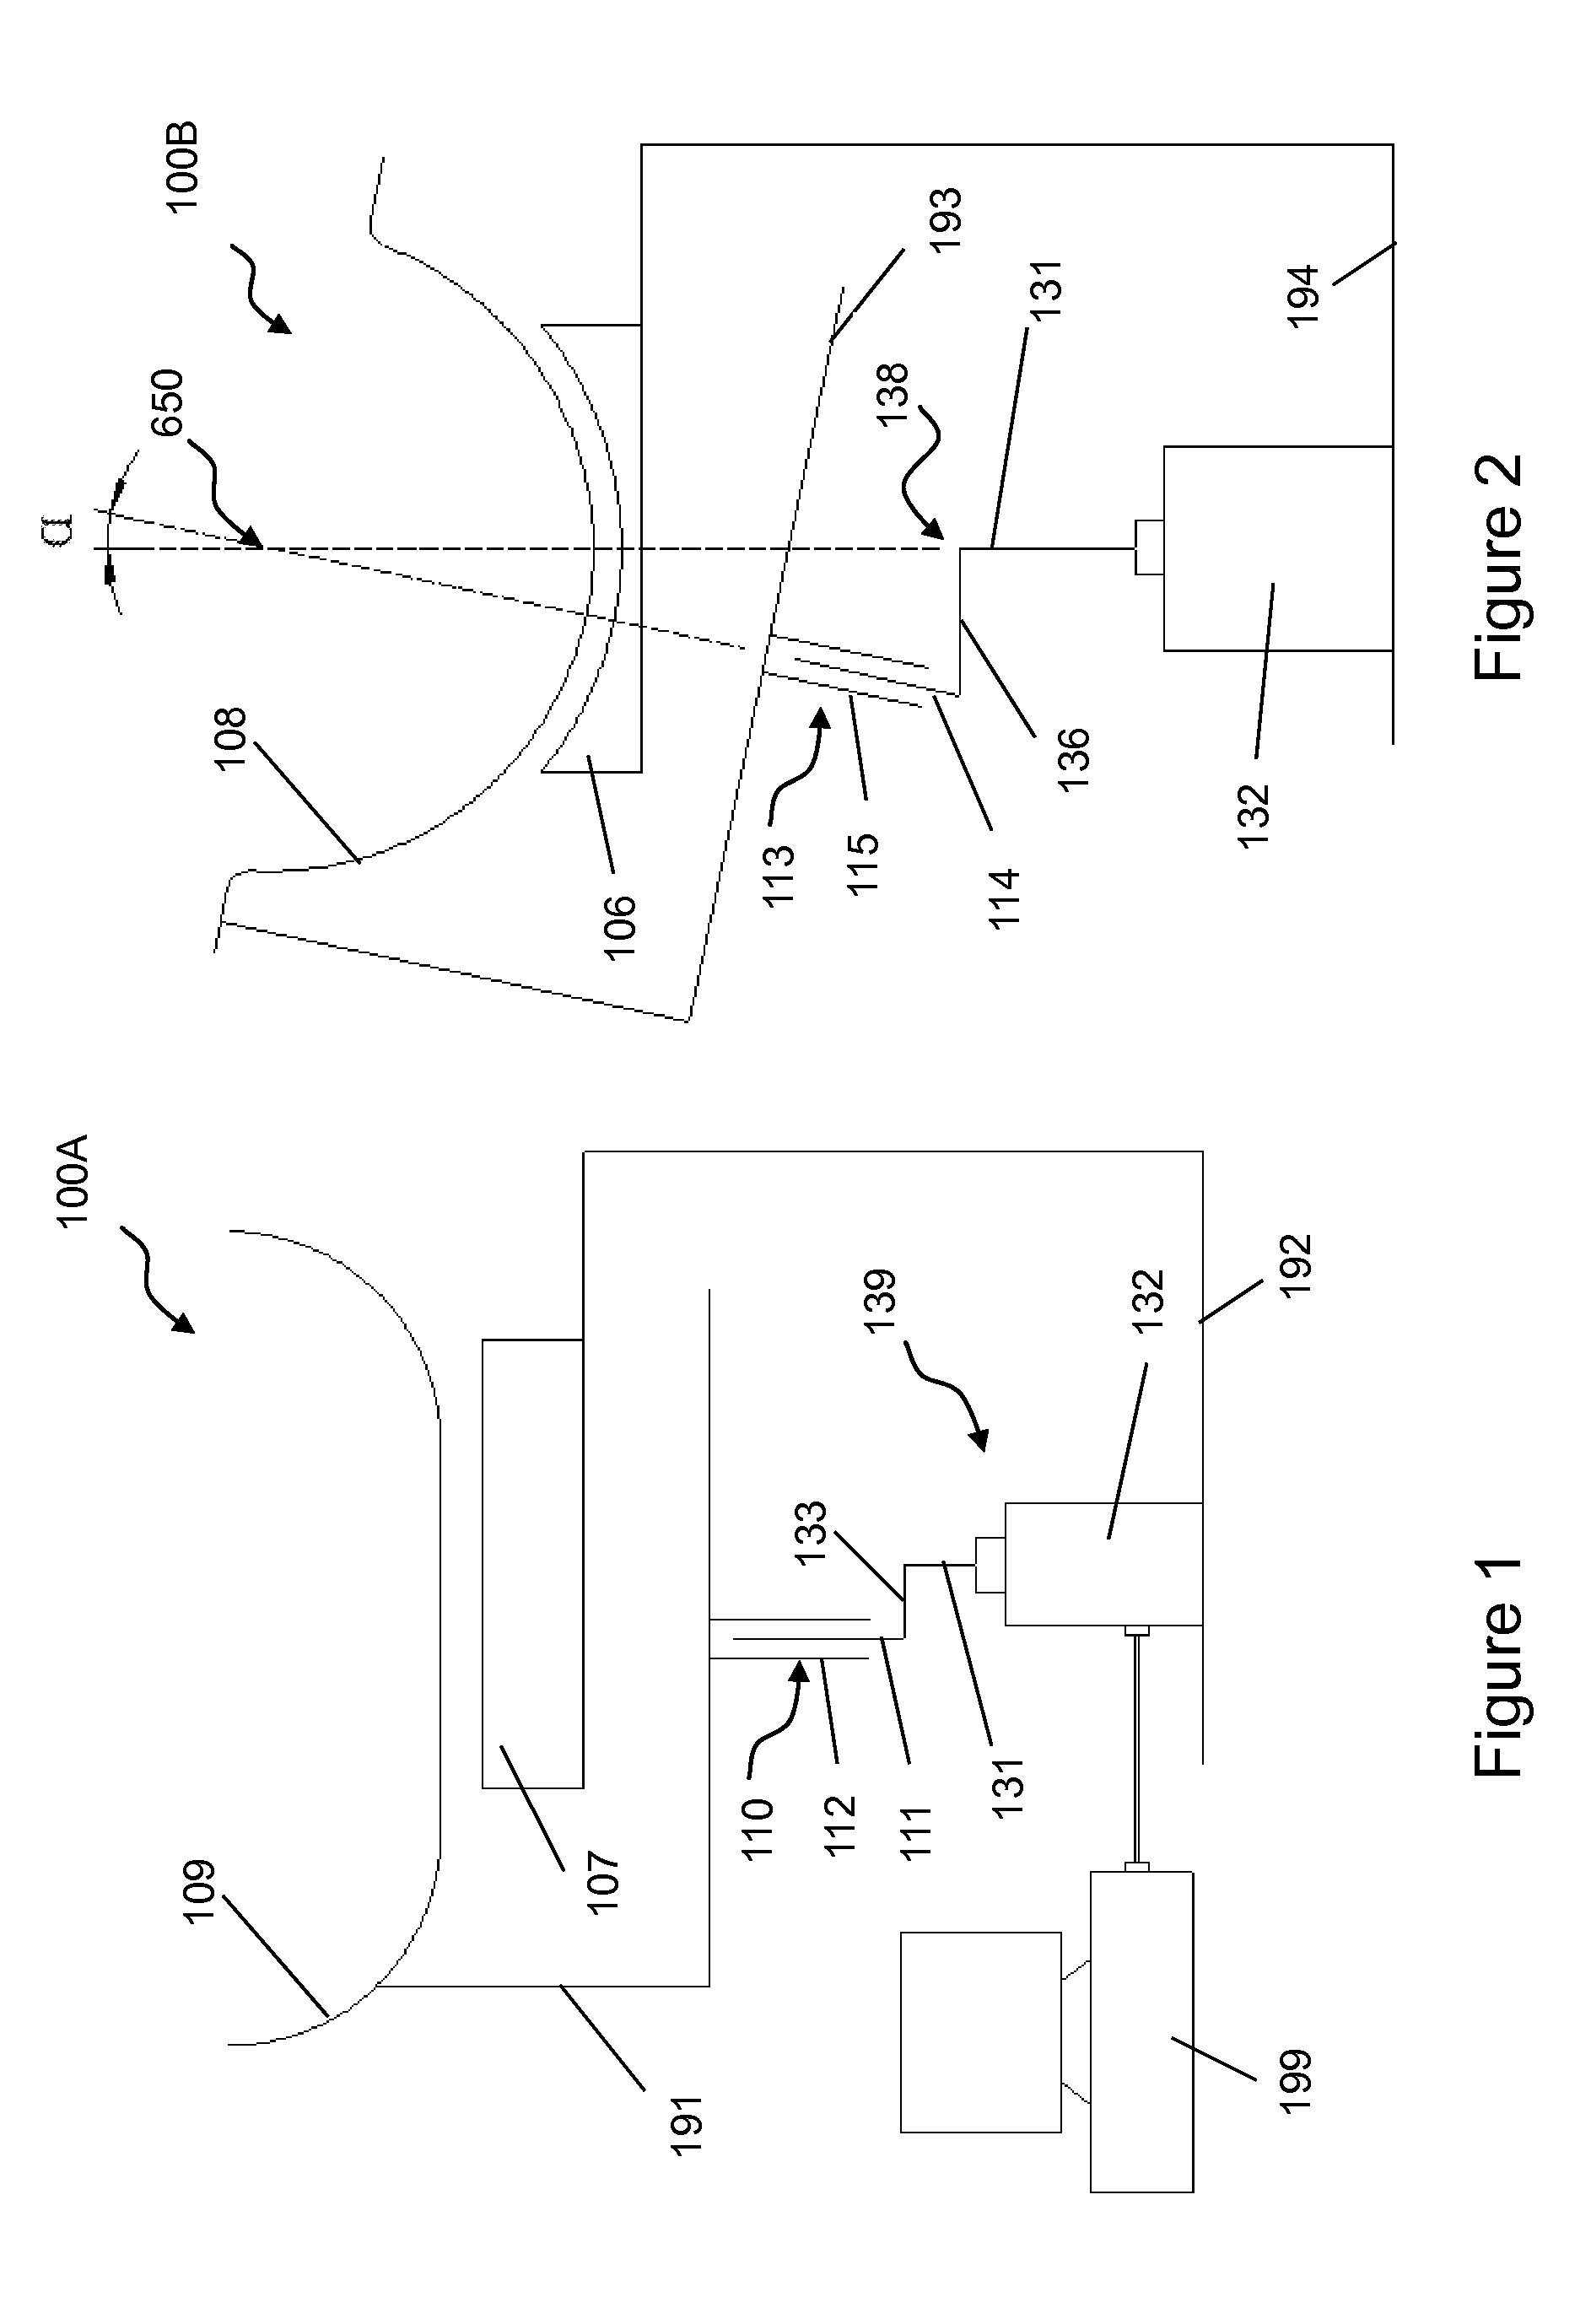 Automated stirring and mixing apparatus for cooking